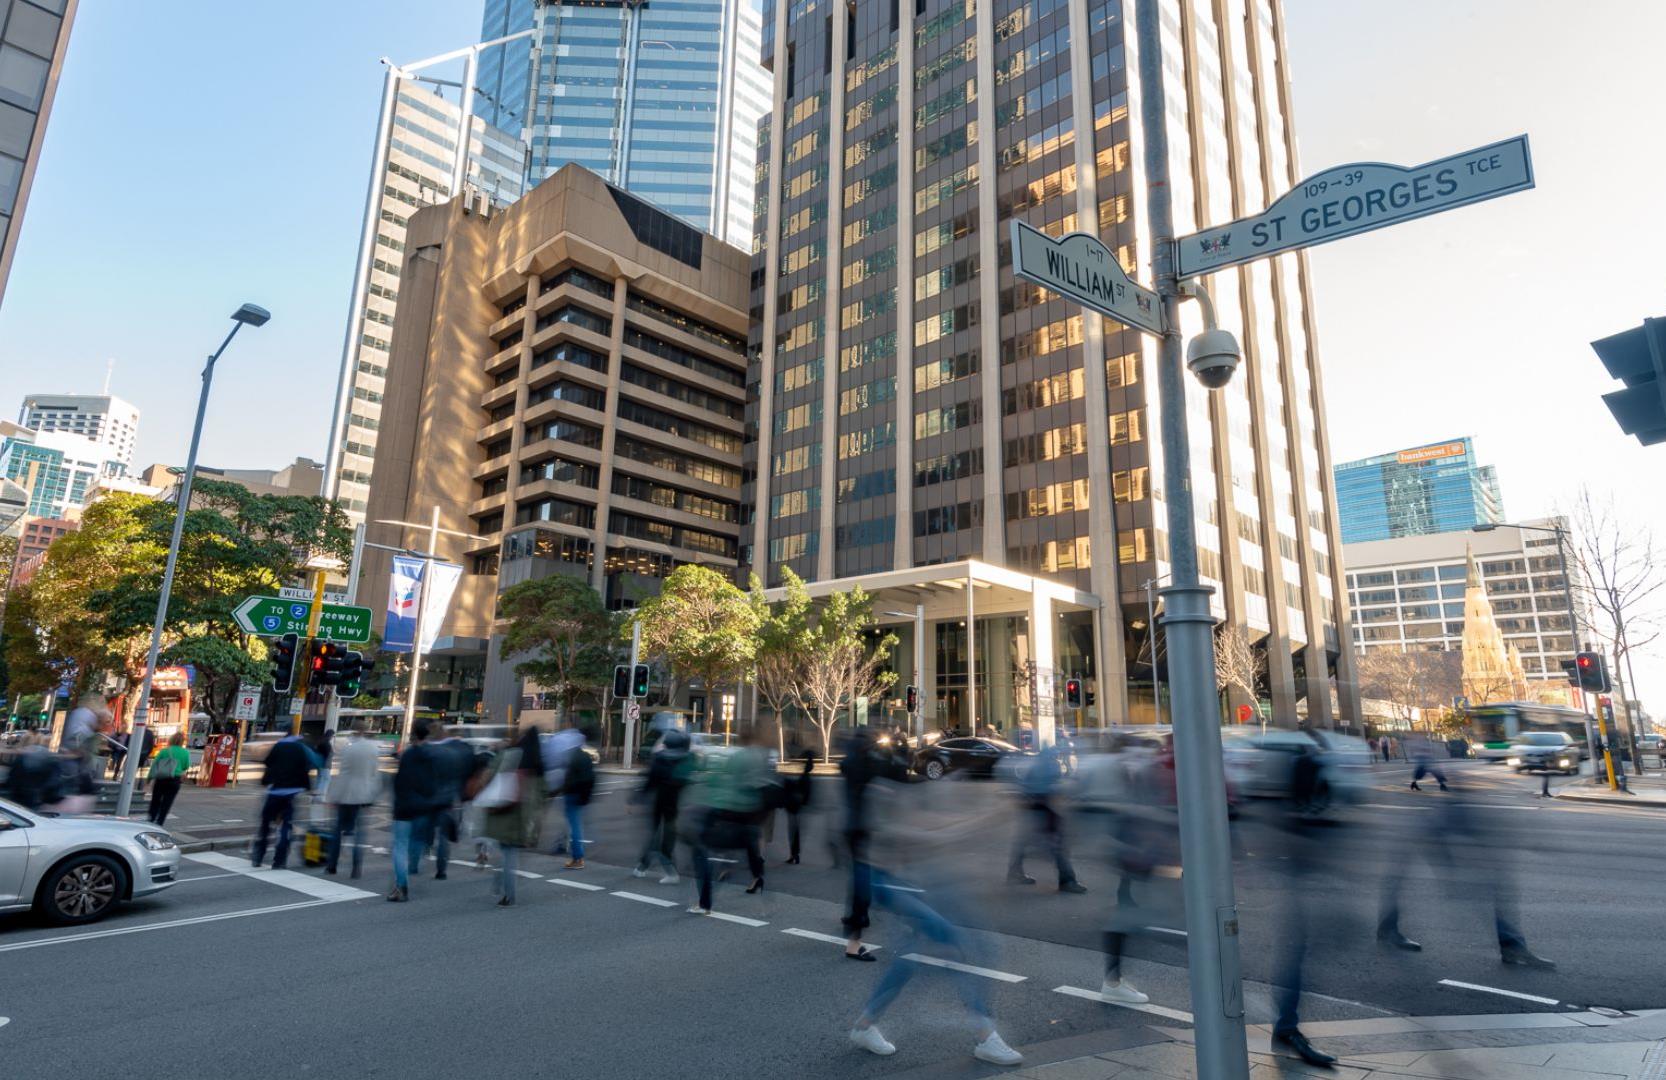 Pedestrians crossing at St Georges Terrace and William Street